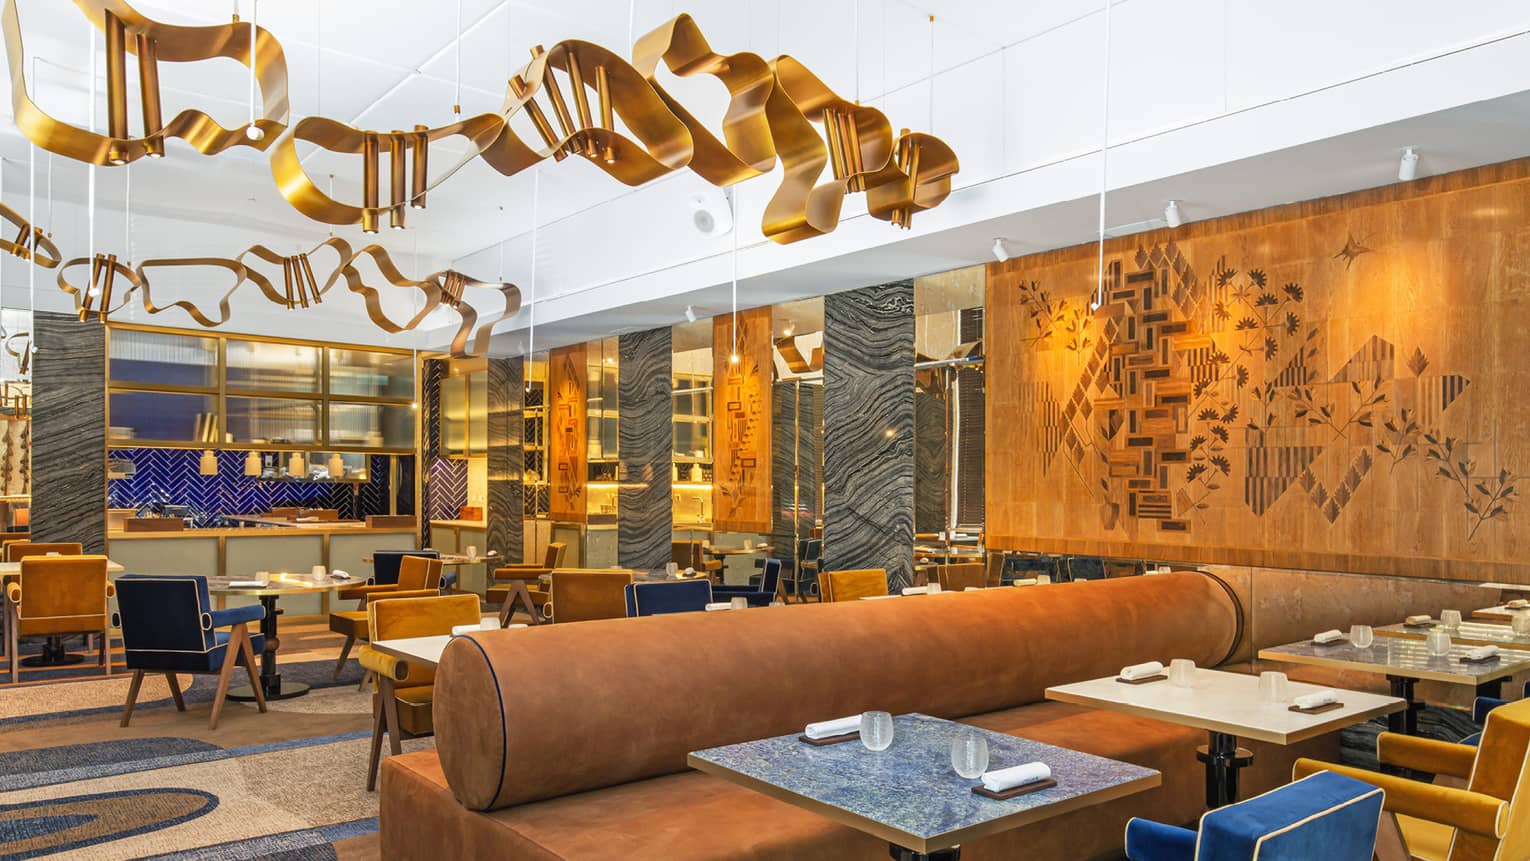 Modern dining area with gold, blue and deep camel accents and art flanking walls and ceiling